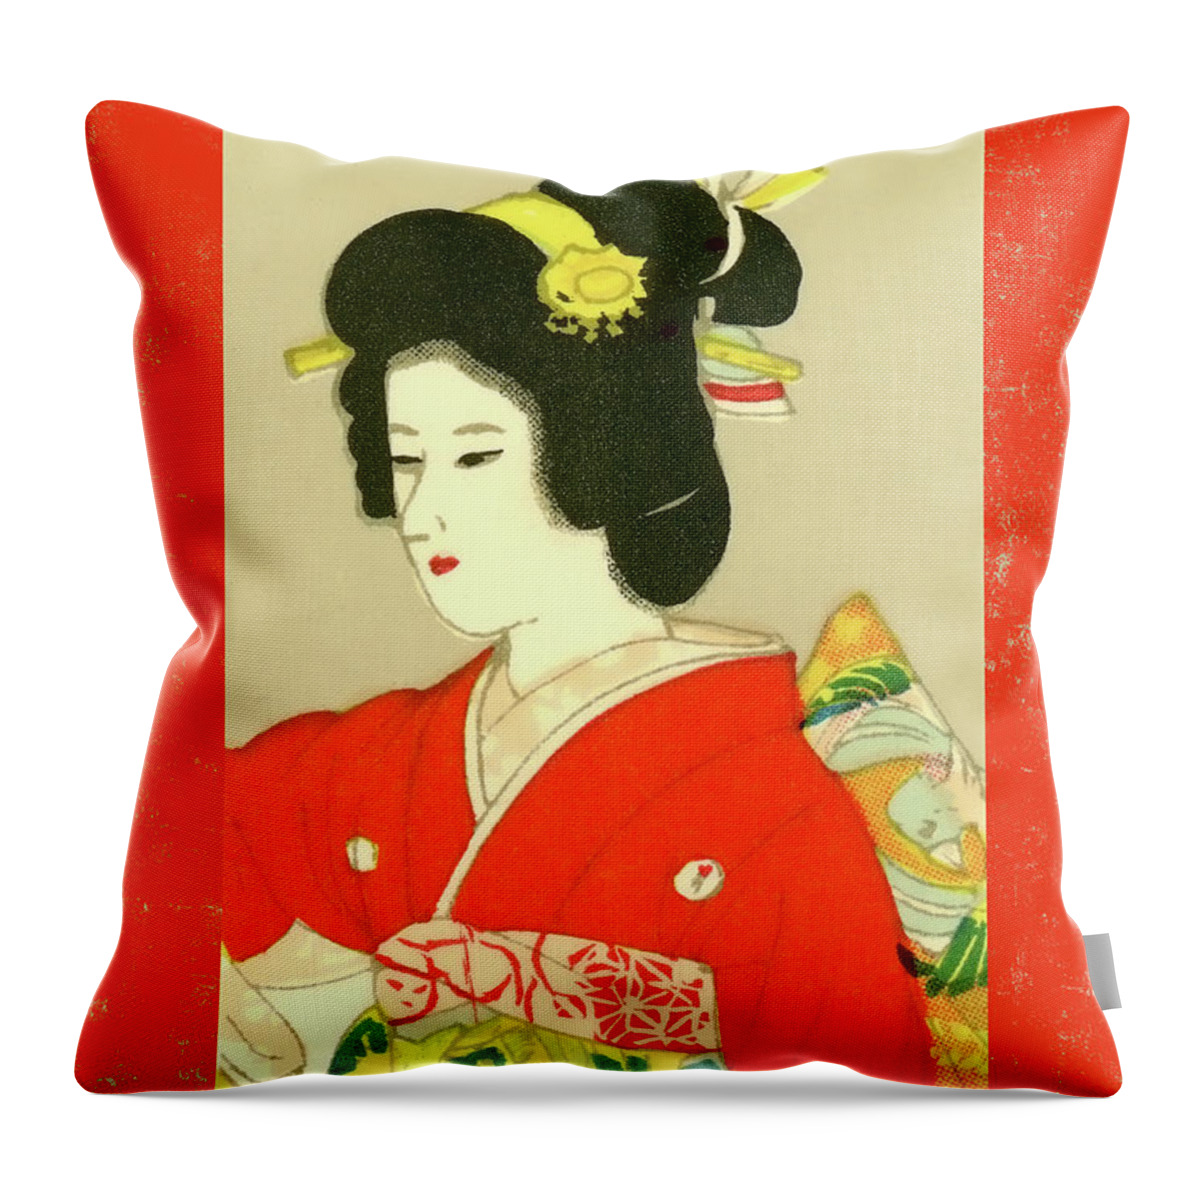 Japan Throw Pillow featuring the mixed media Designer Series Japanese Matchbox Label 133 by Carol Leigh